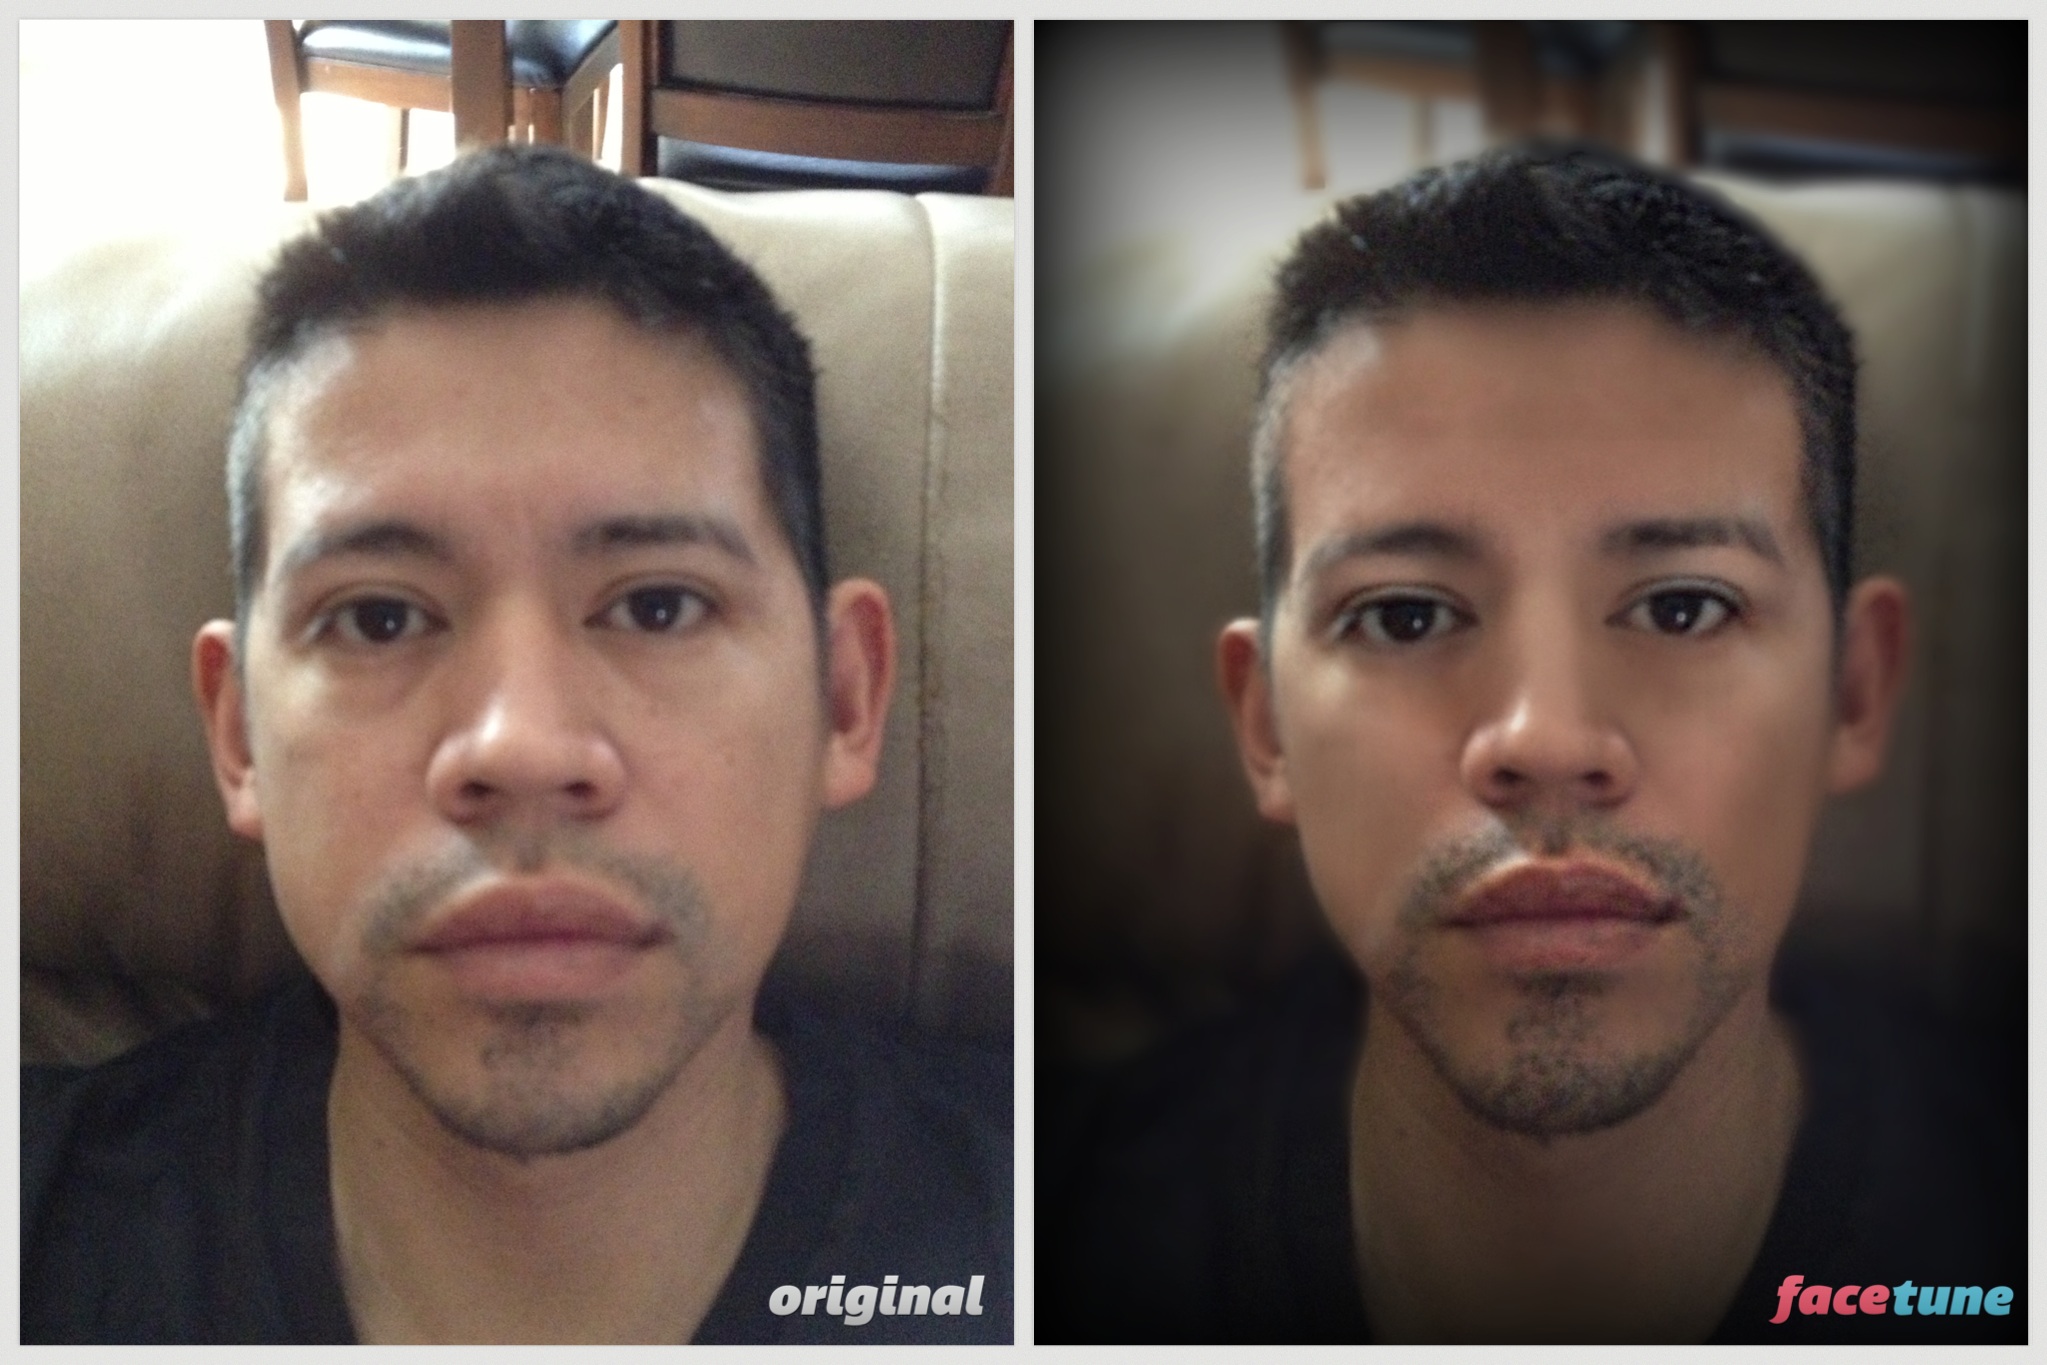 The image is two photos of the same man looking straight ahead at the Camera using the photo editing app Facetune. The photo on the left is an unfiltered version of the photo. The photo on the right is filtered, blurring the man's skin which erases imperfections. The filter also slims his face and enlarges his eyes. 